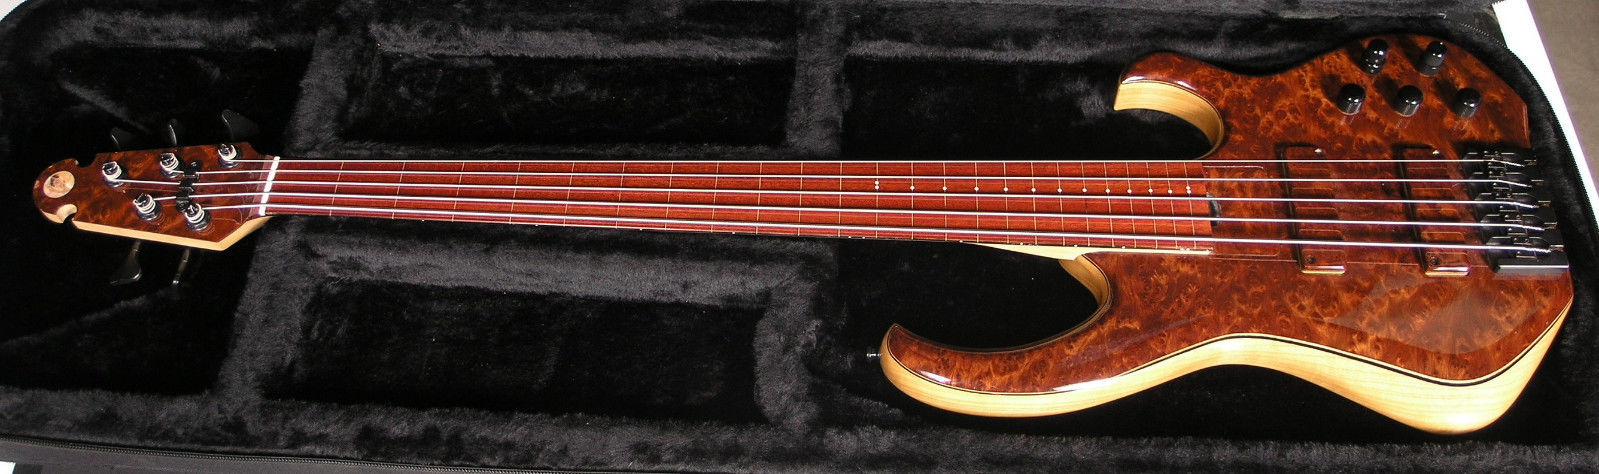 Skjold Exotic Series 5 String Offset Fretless Bass 2004 Fresh SetUP Done by Pete